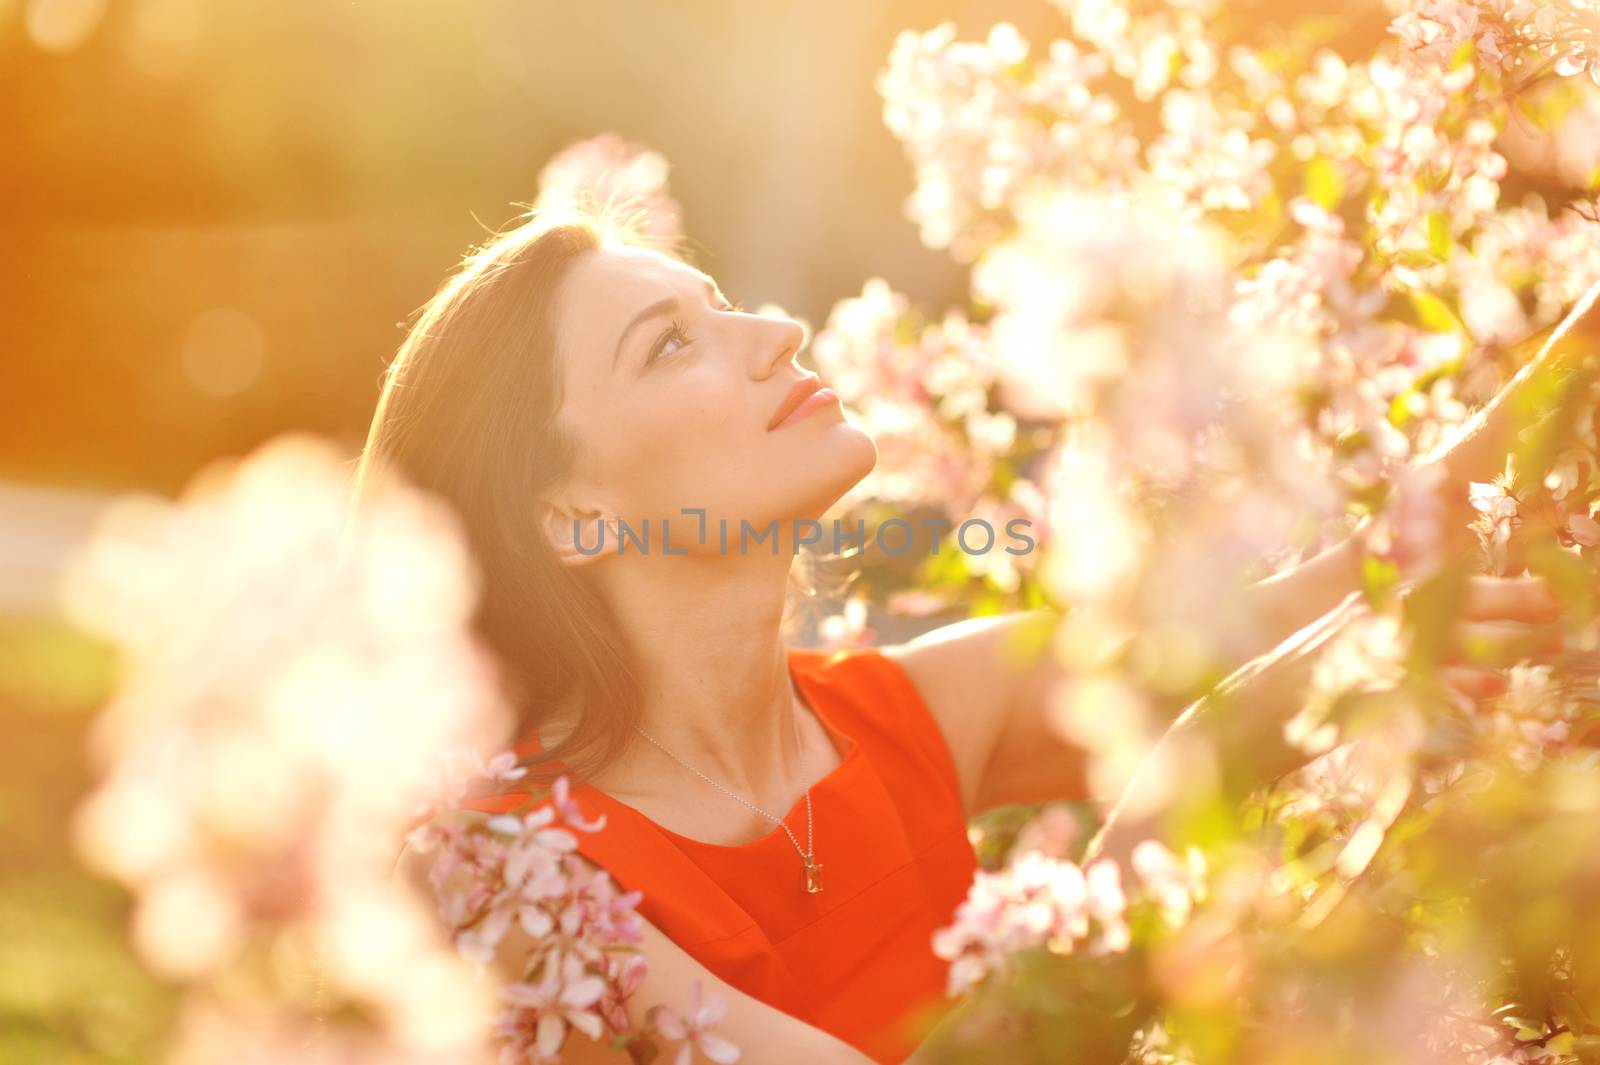 portrait of young lovely woman in spring flowers.